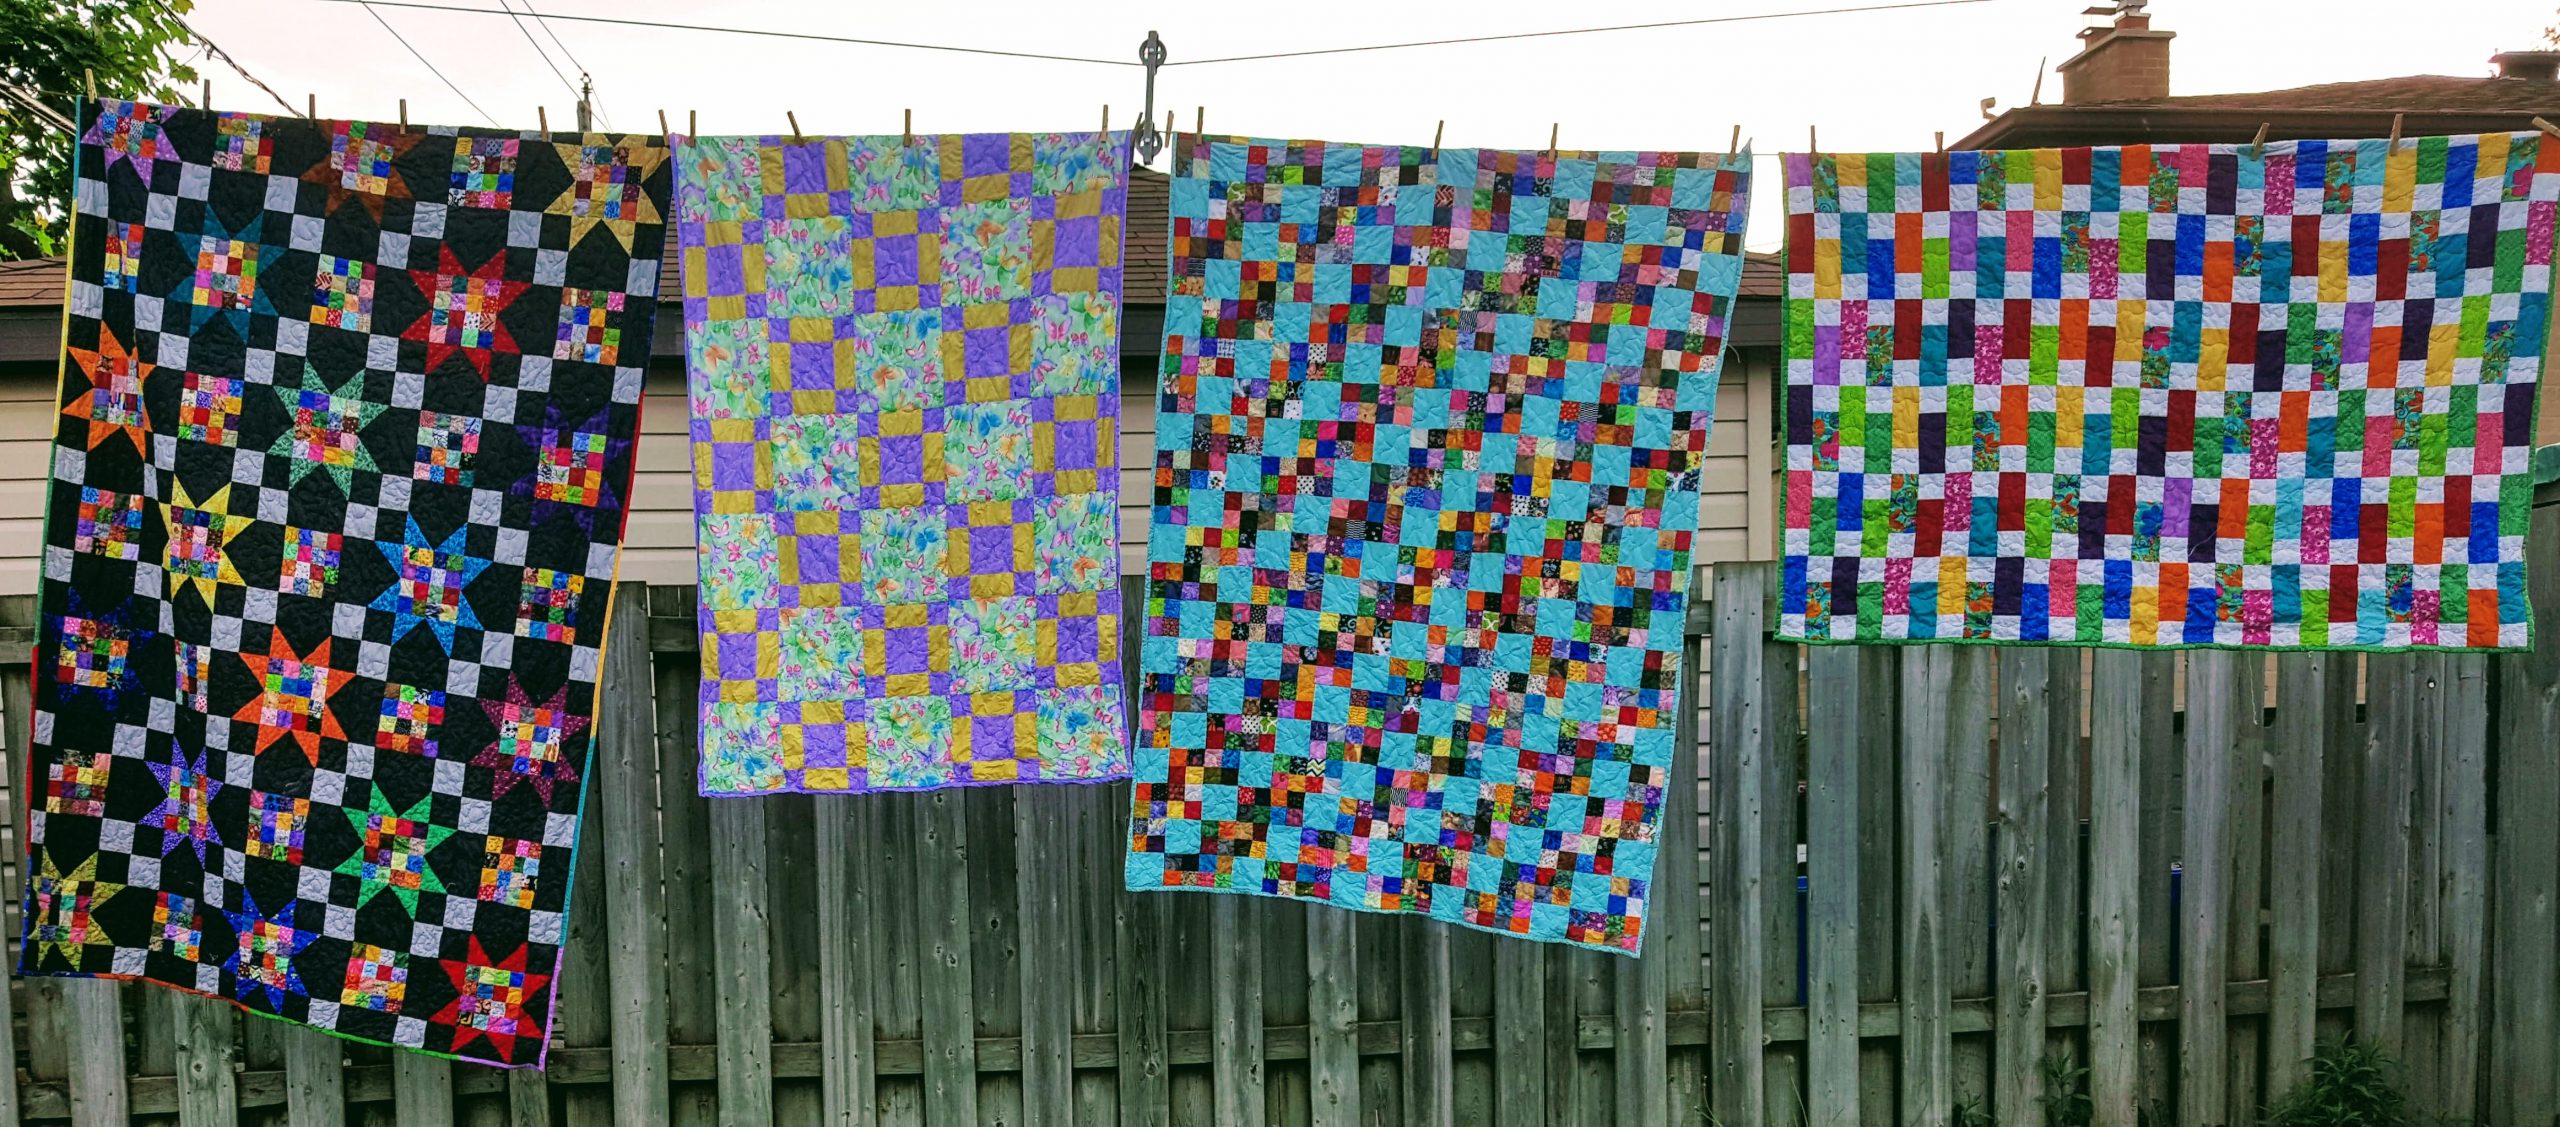 quilts on the clothesline